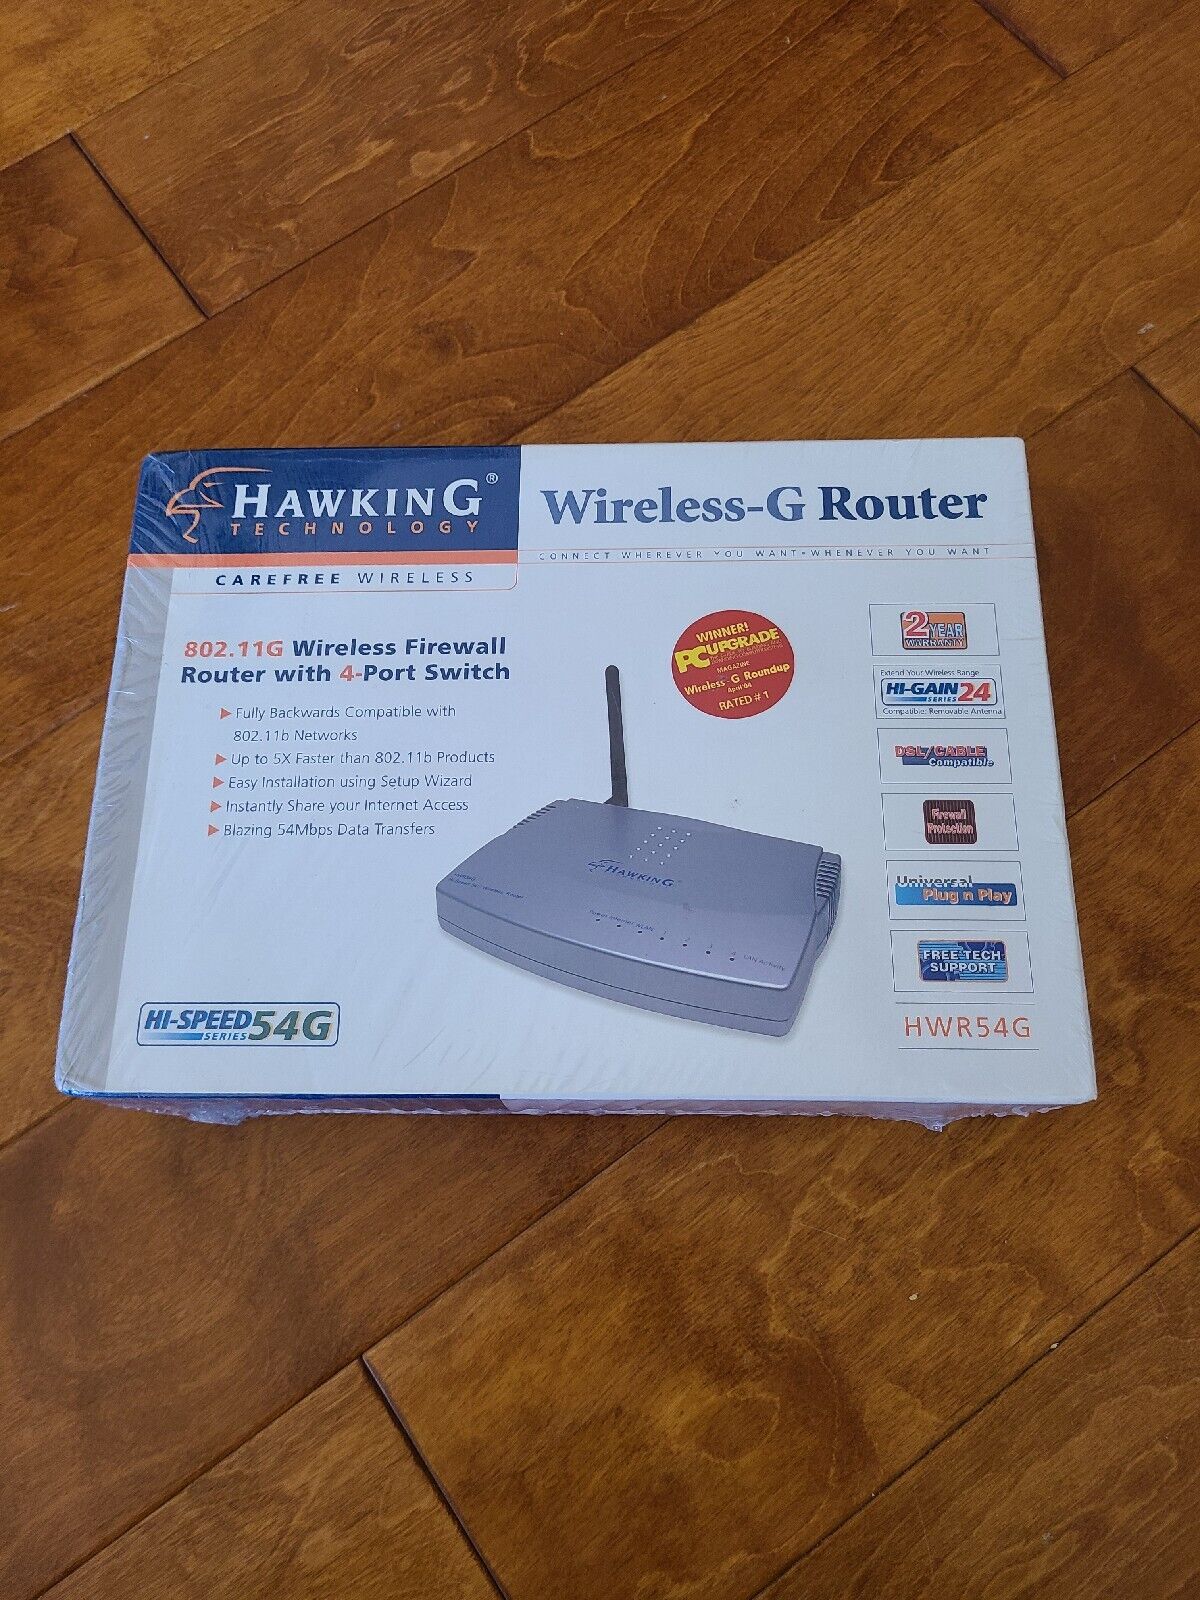 Hawking Technology Wireless-G Router HWR54G - Sealed Brand New.